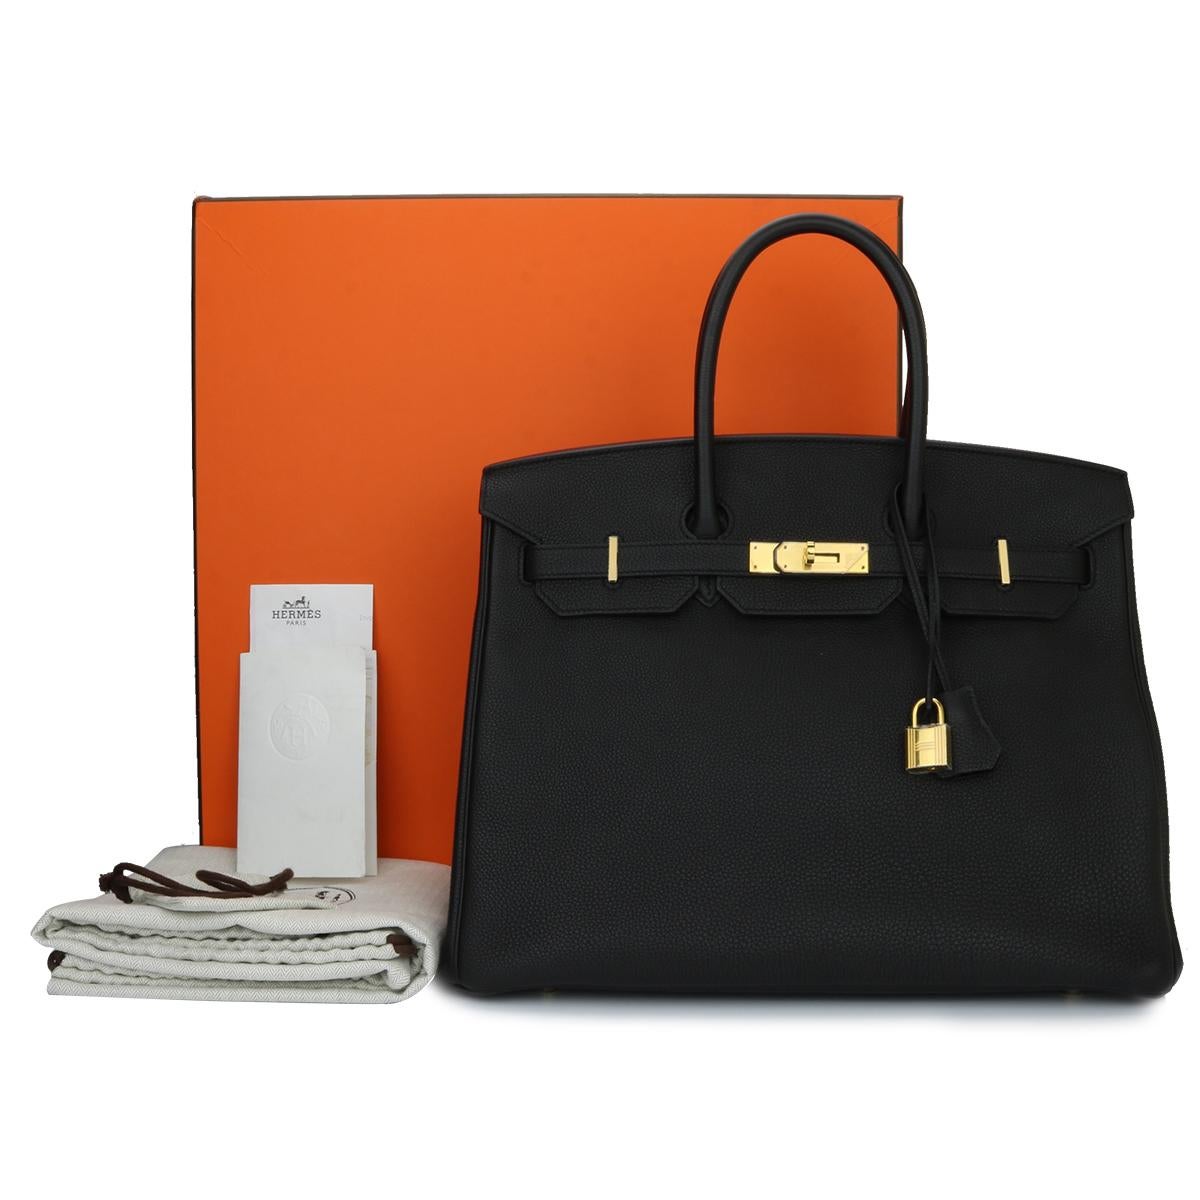 Hermès Birkin 35cm Black Togo Leather with Gold Hardware Stamp T 2015.

This bag is still in a pristine condition. The leather still smells fresh as when new, along with it still holding to the shape very well. The hardware still very shiny and